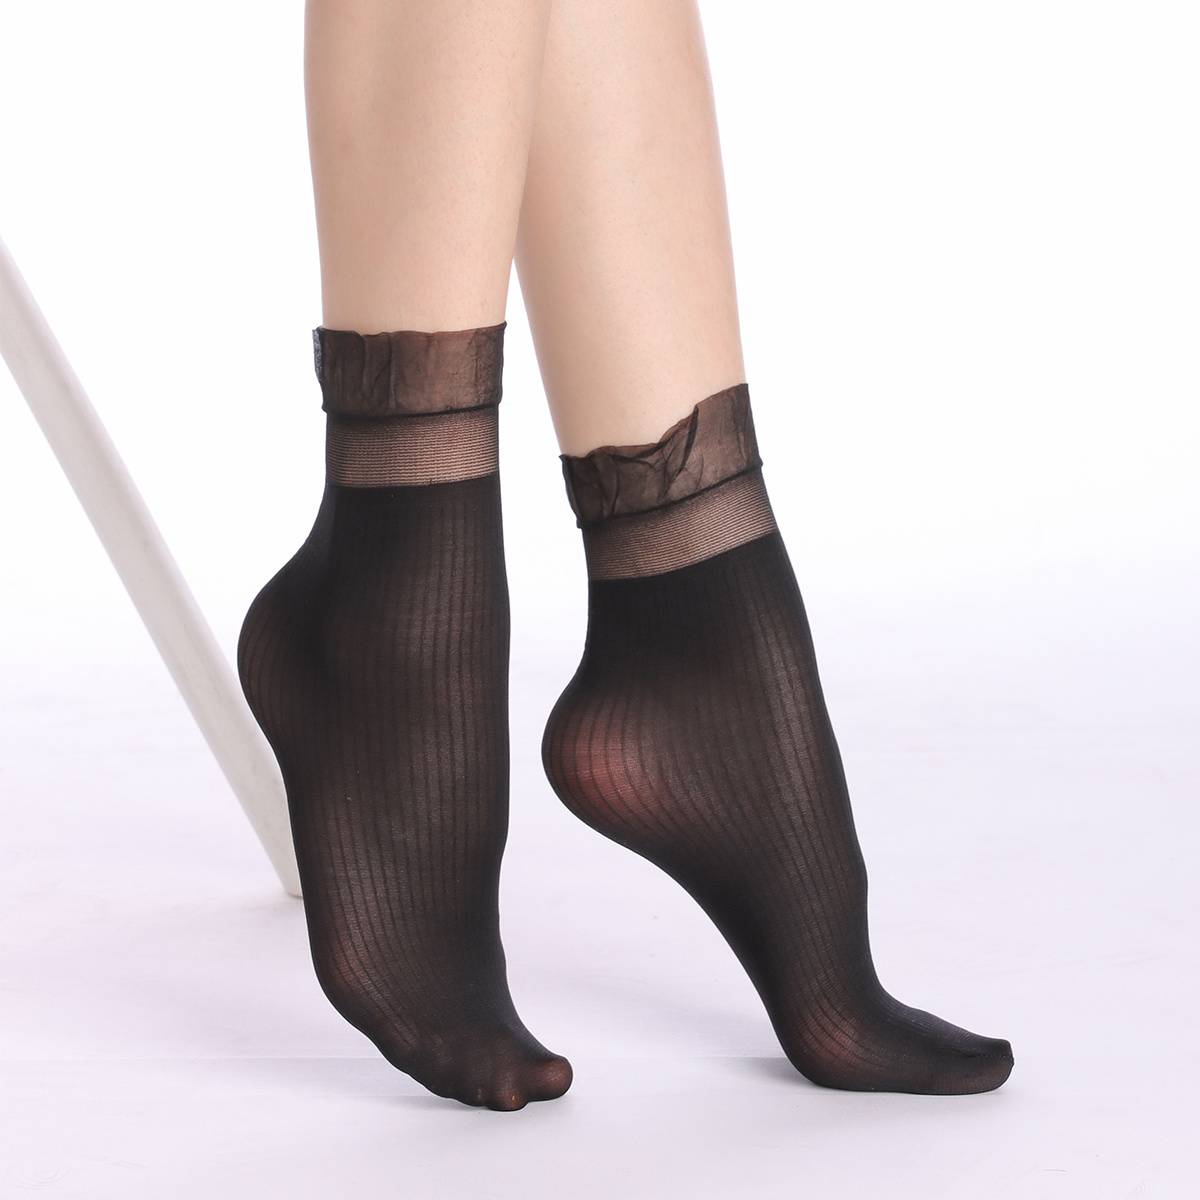 DEEP TOUCH Calcetines tobilleros para mujer, calcetines de malla baja,  calcetines de malla baja, 5 pares